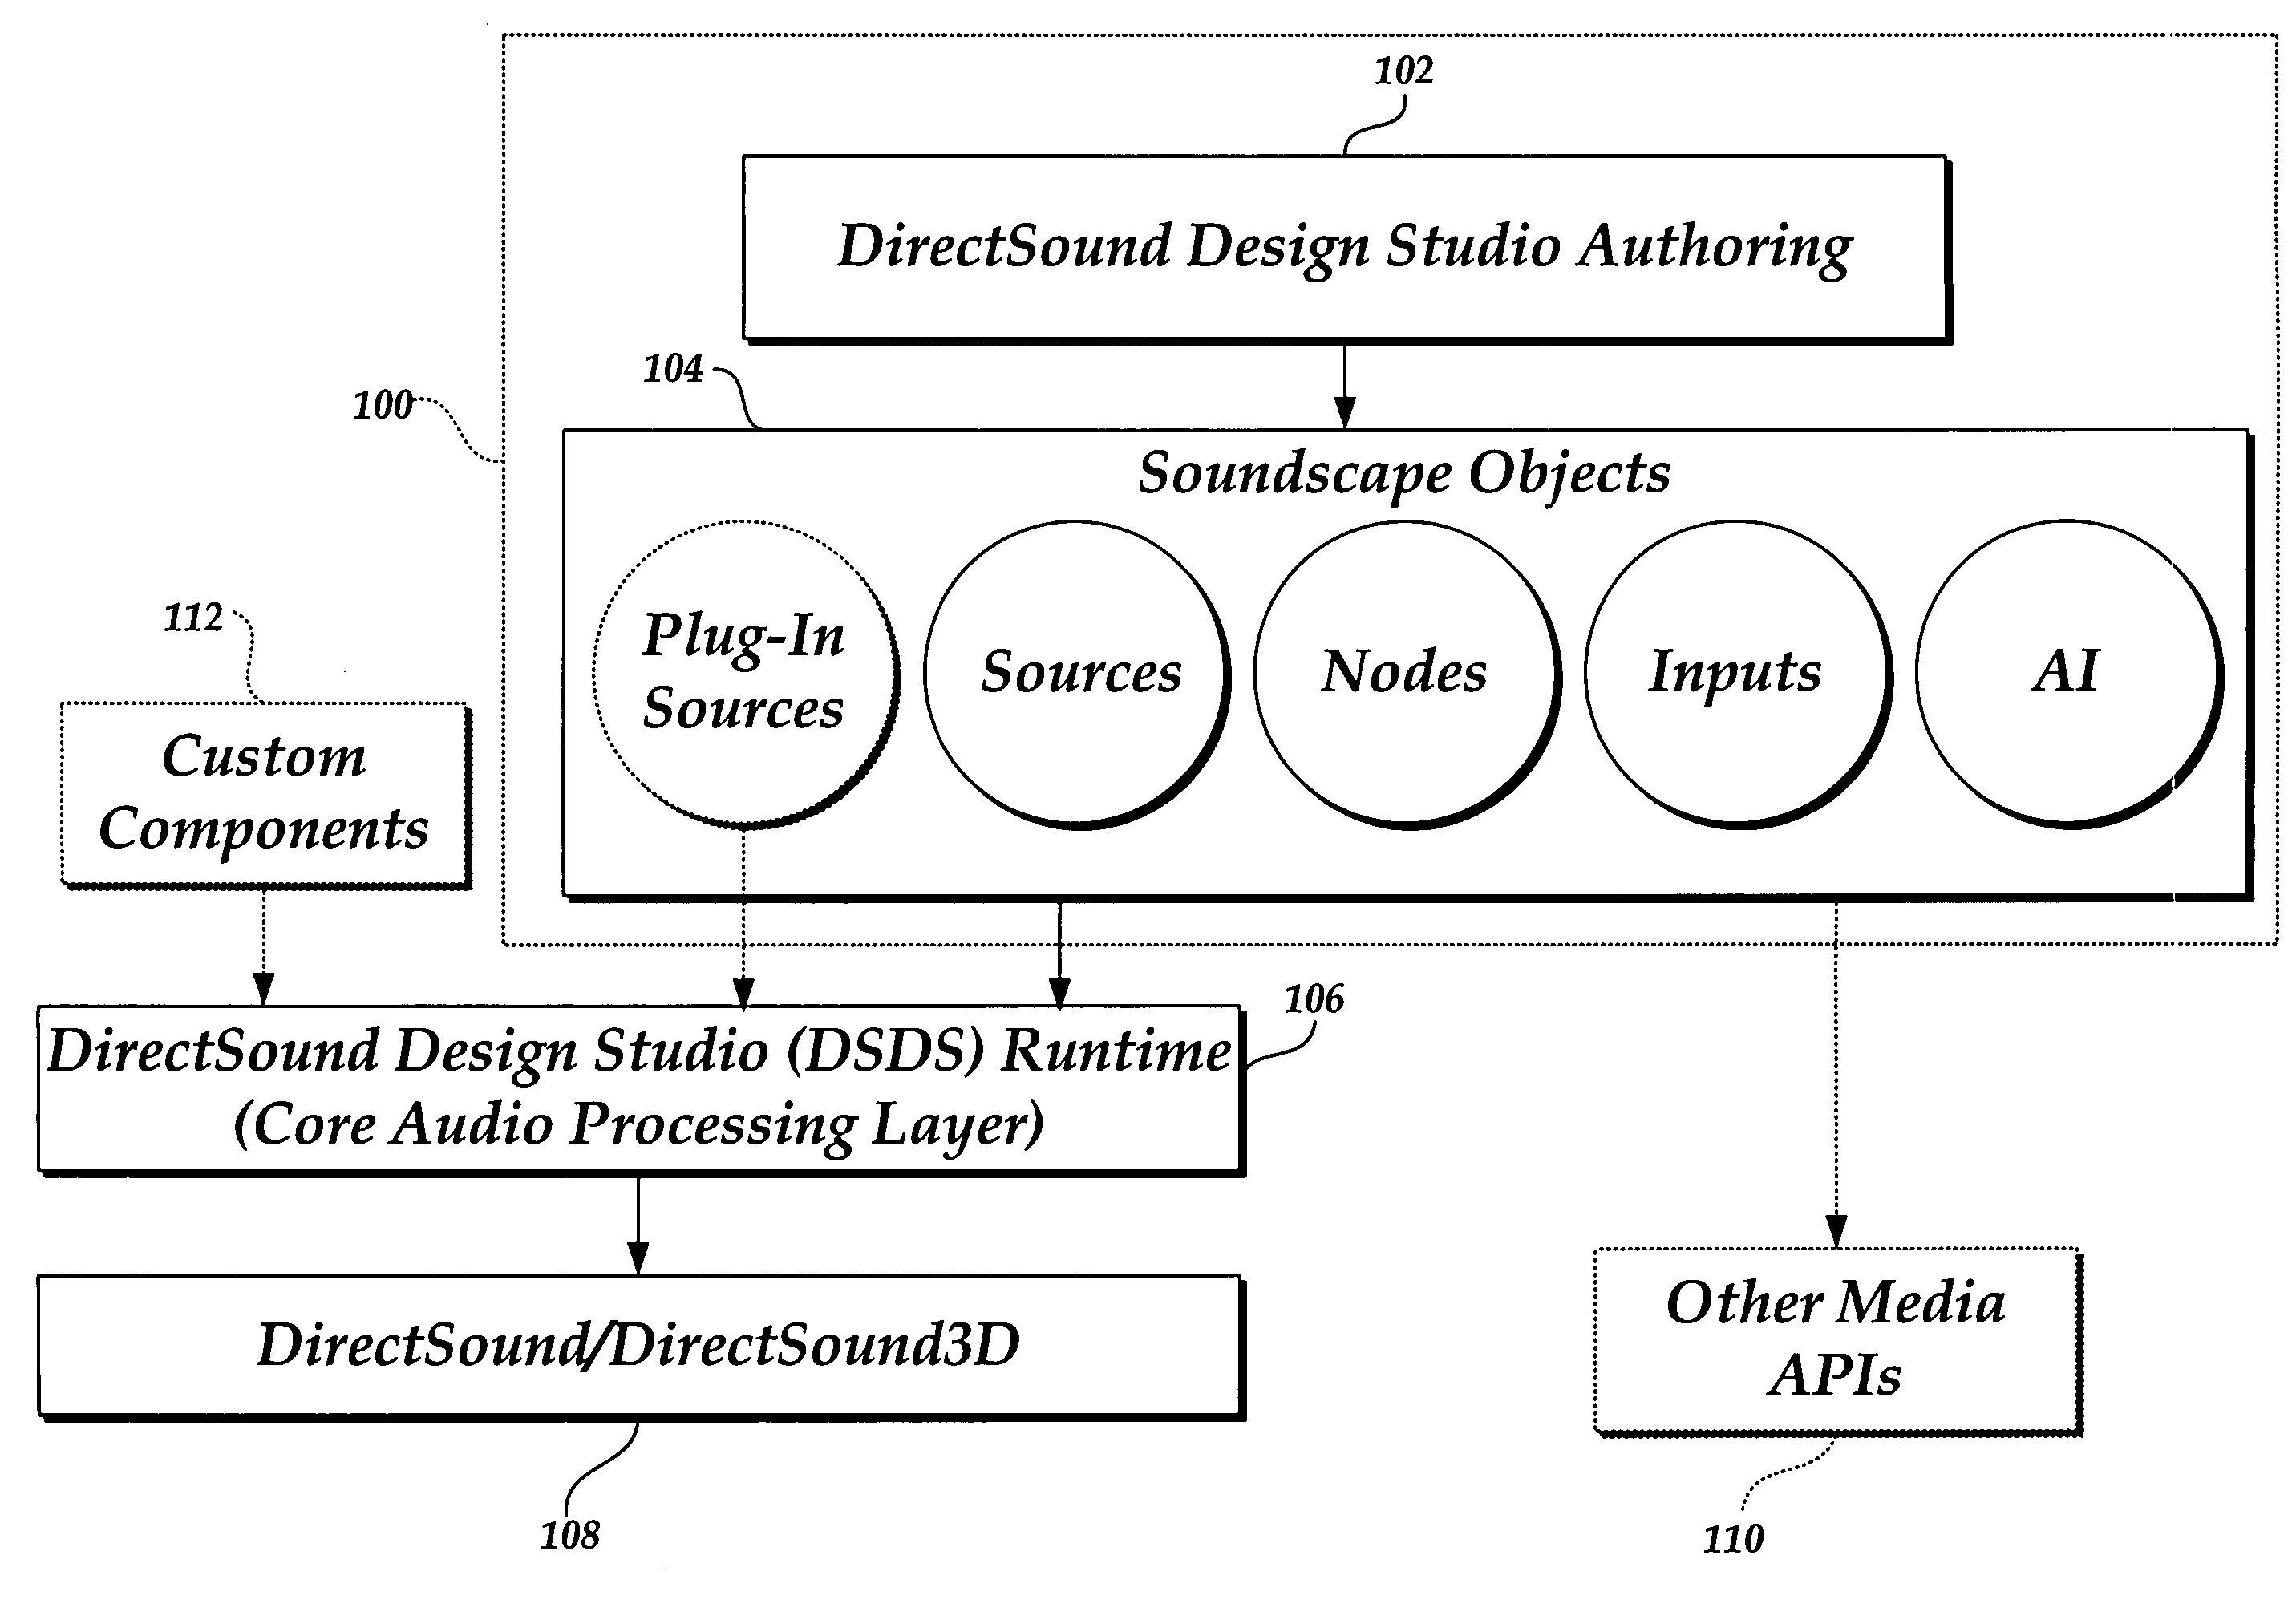 Method and system for authoring a soundscape for a media application